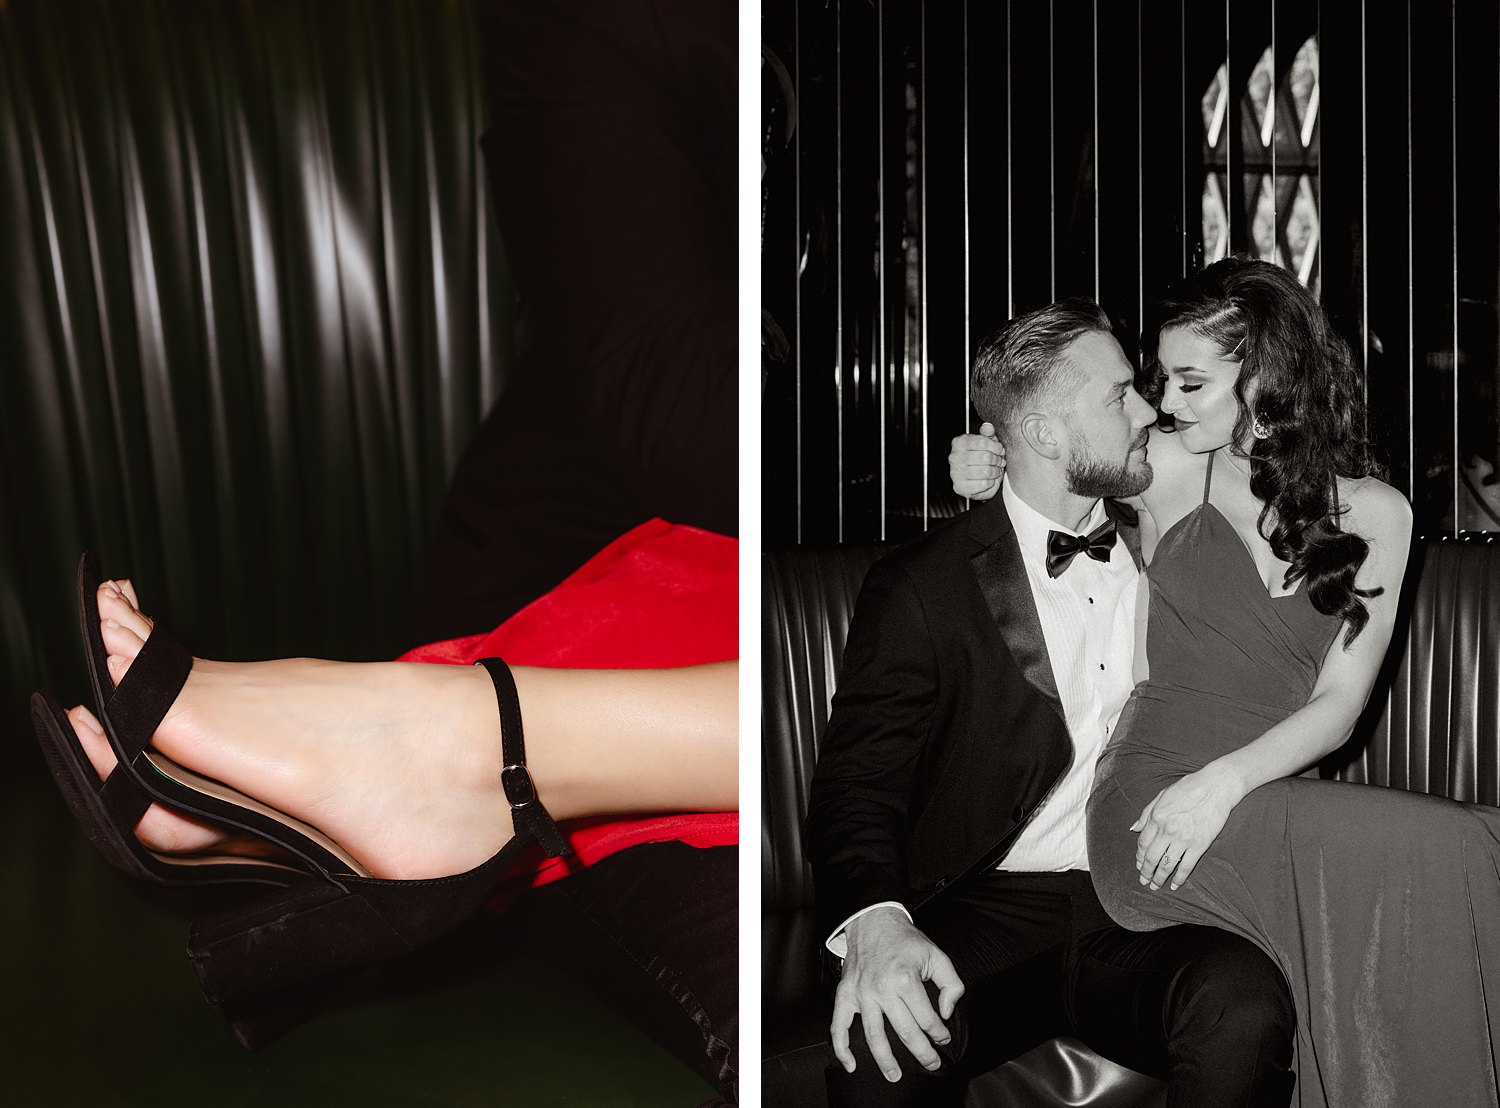 Woman in red Dress and man in black tuxedo sitting together in green booth black high heels